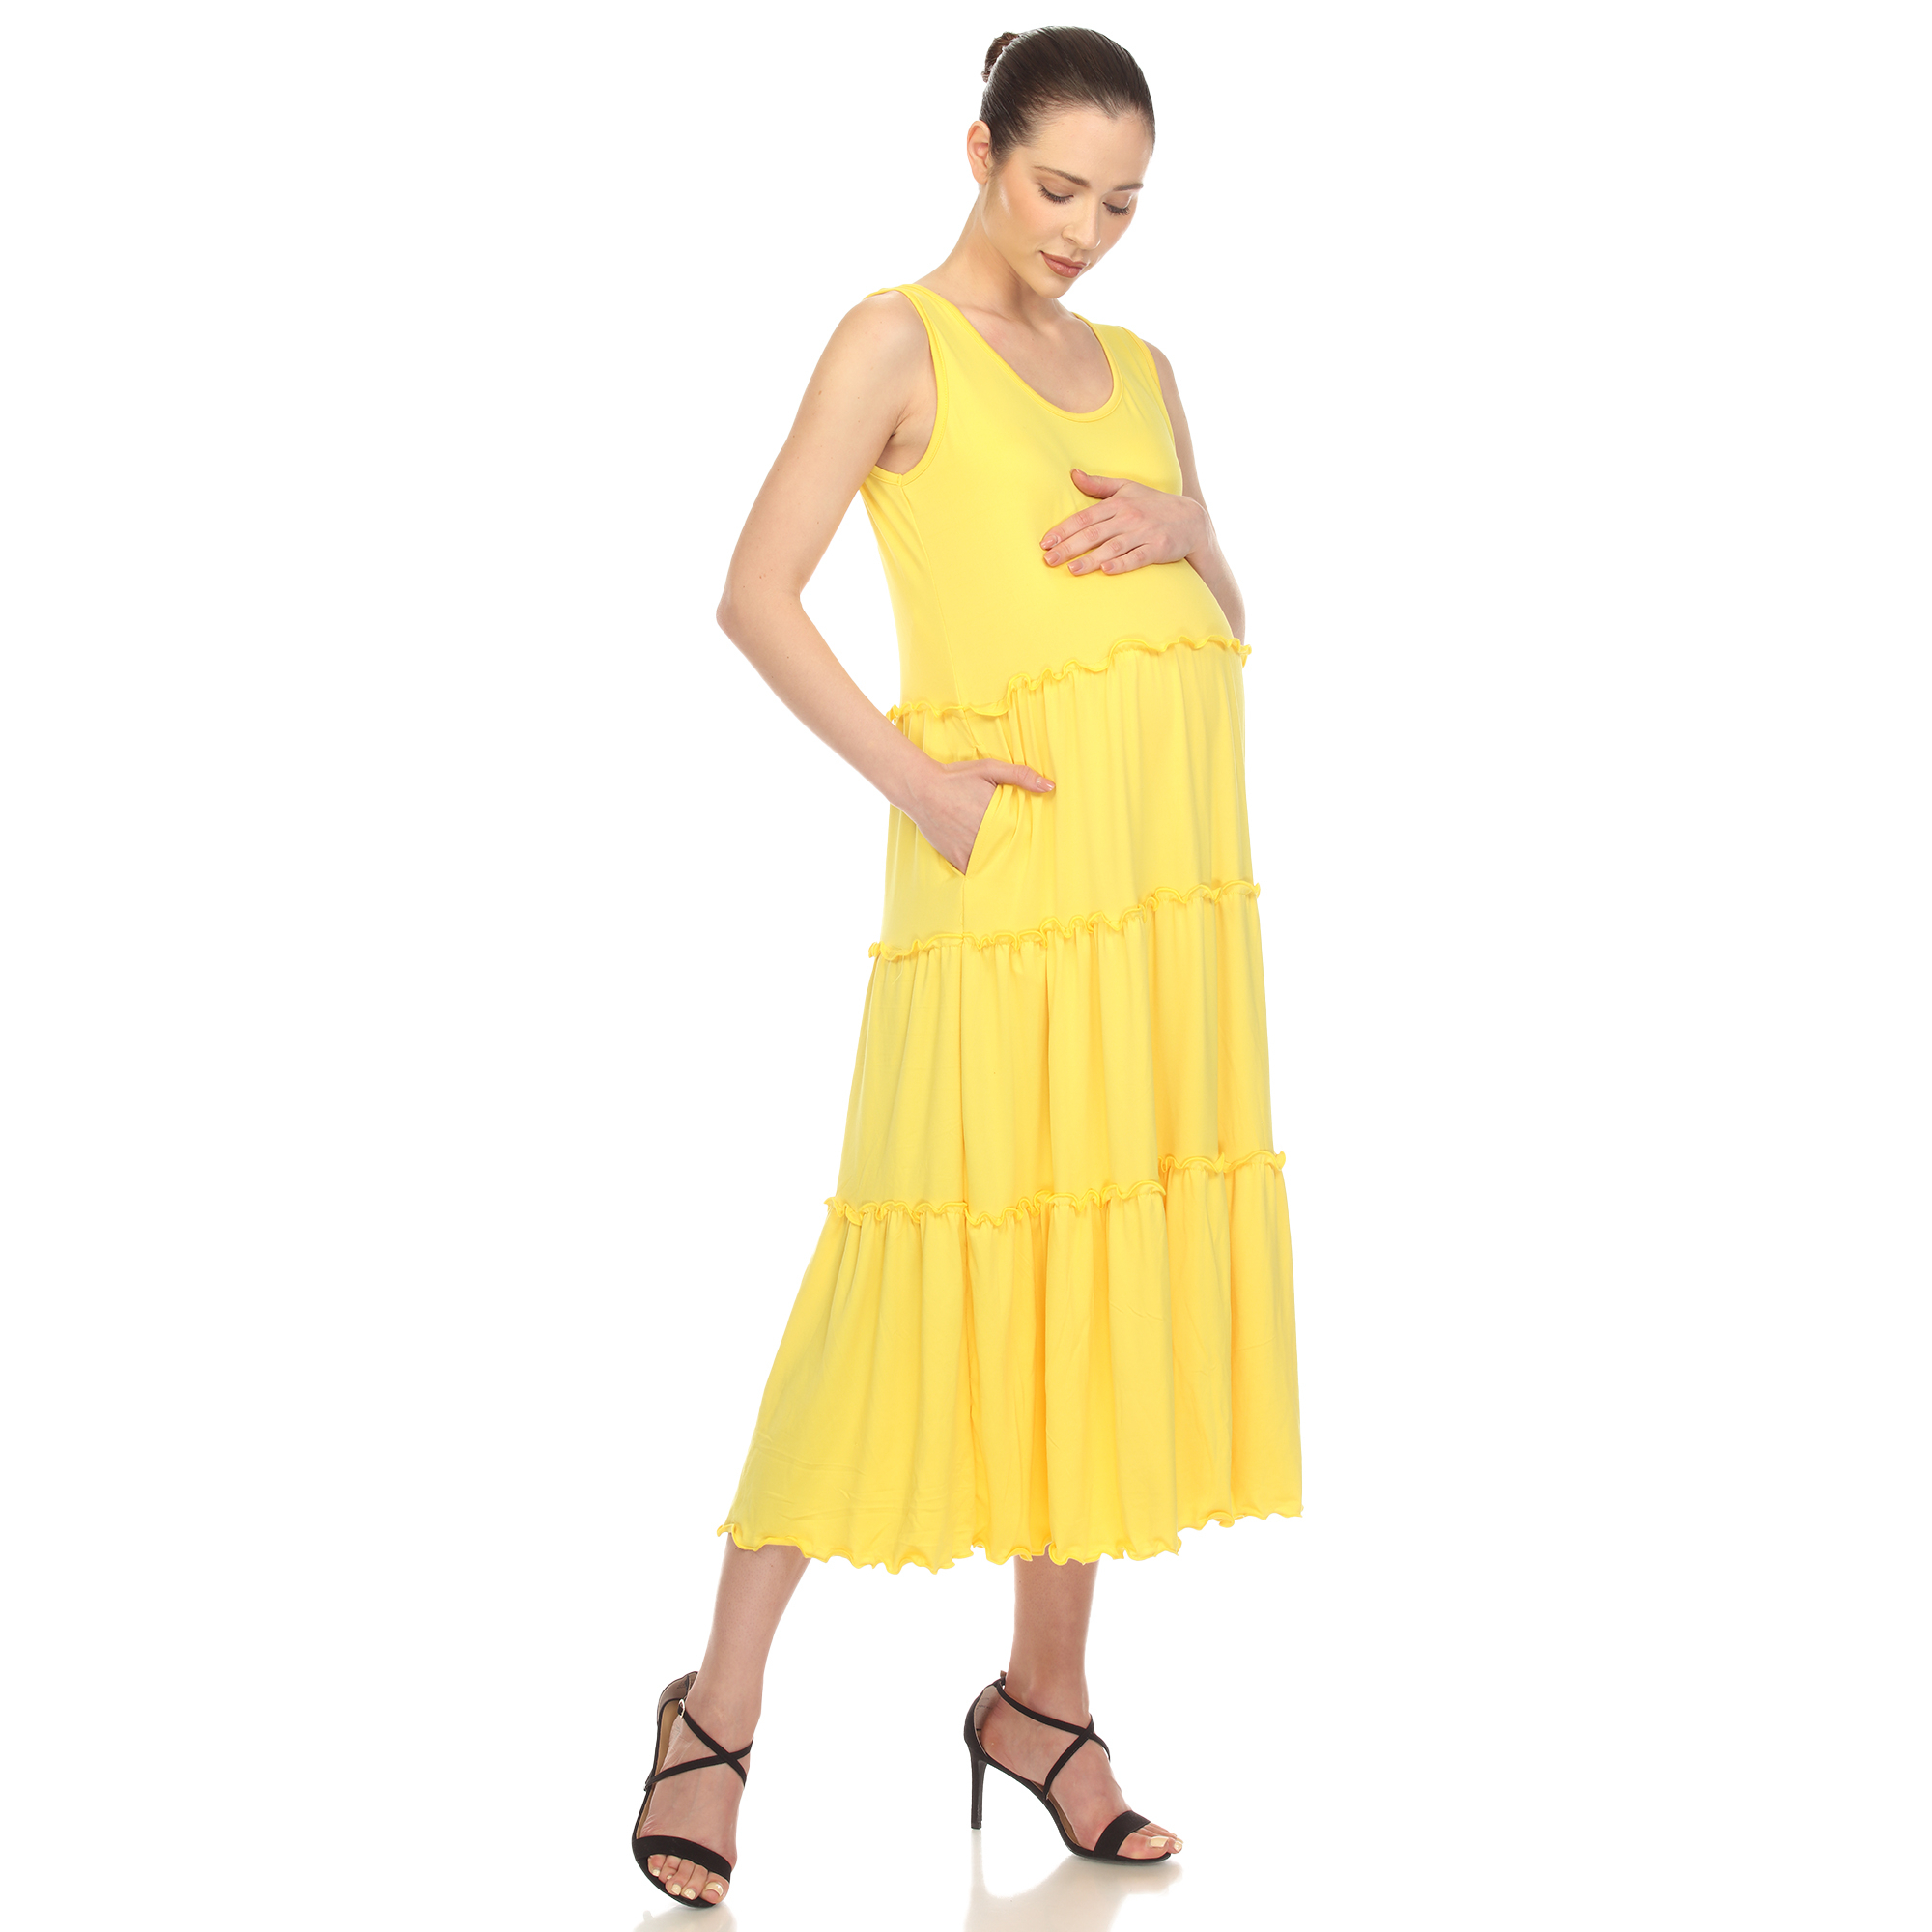 White Mark Women's Maternity Scoop Neck Tiered Midi Dress - Canary Yellow, Large